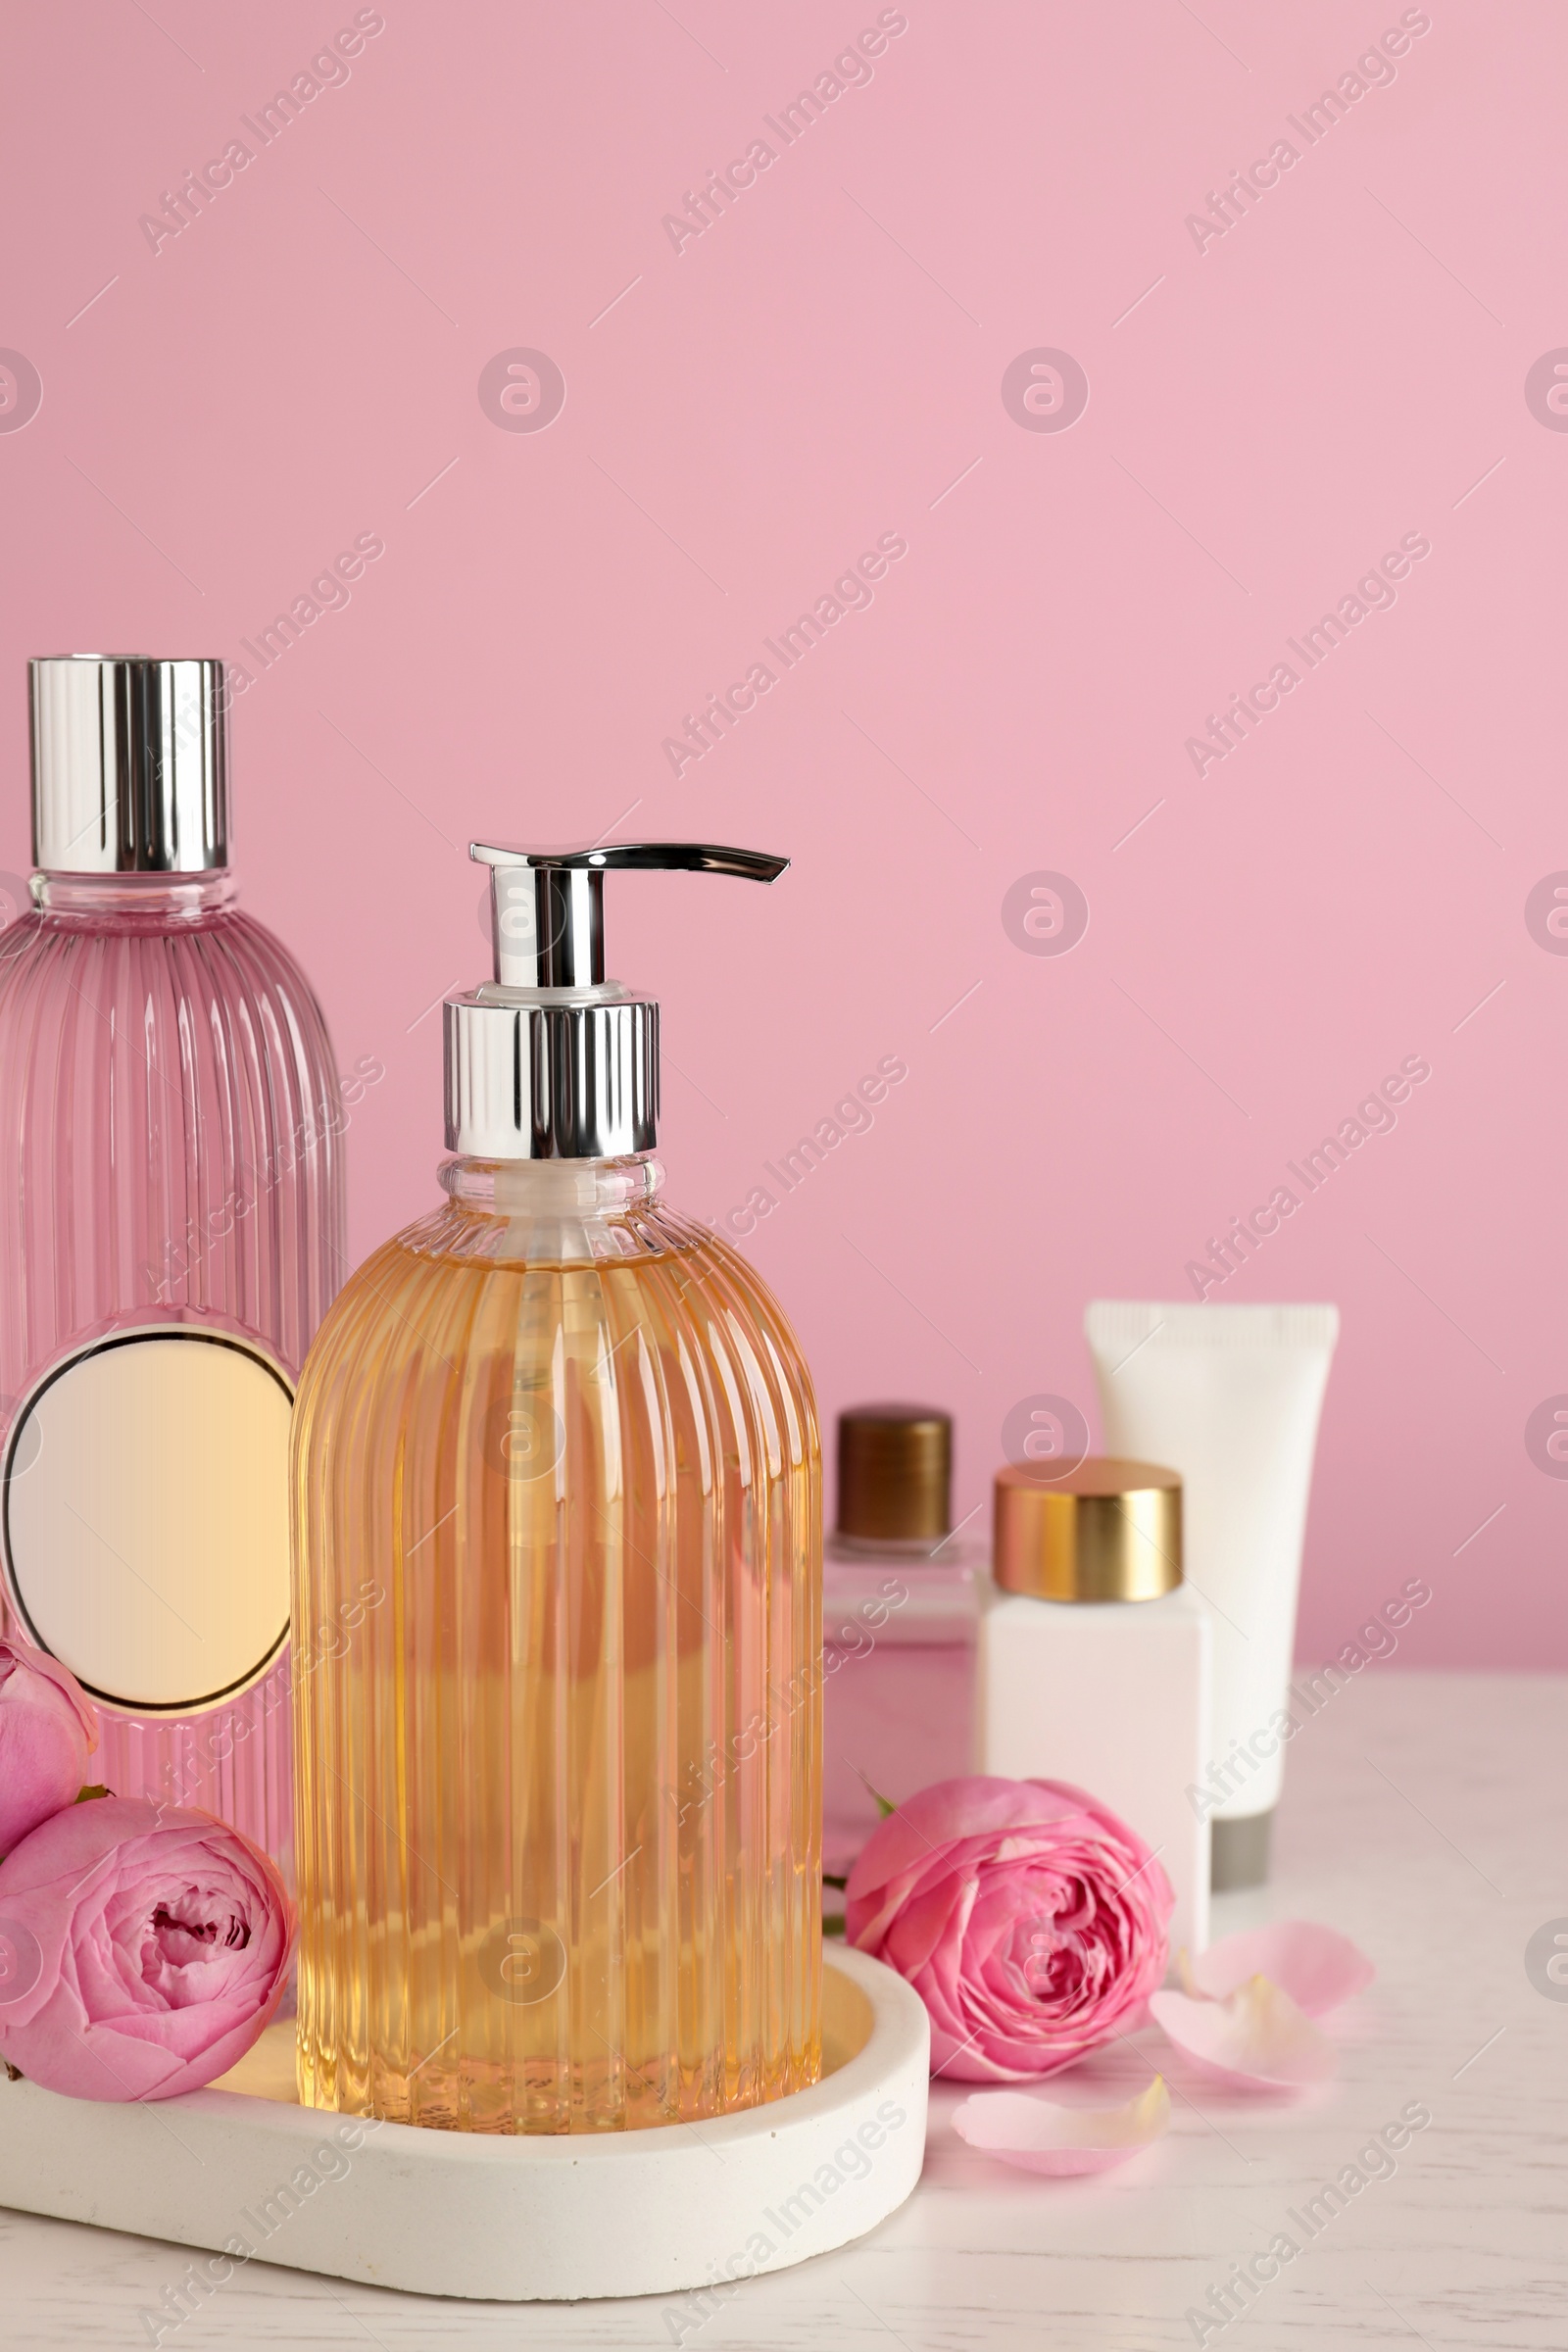 Photo of Cosmetic products and flowers on white wooden table